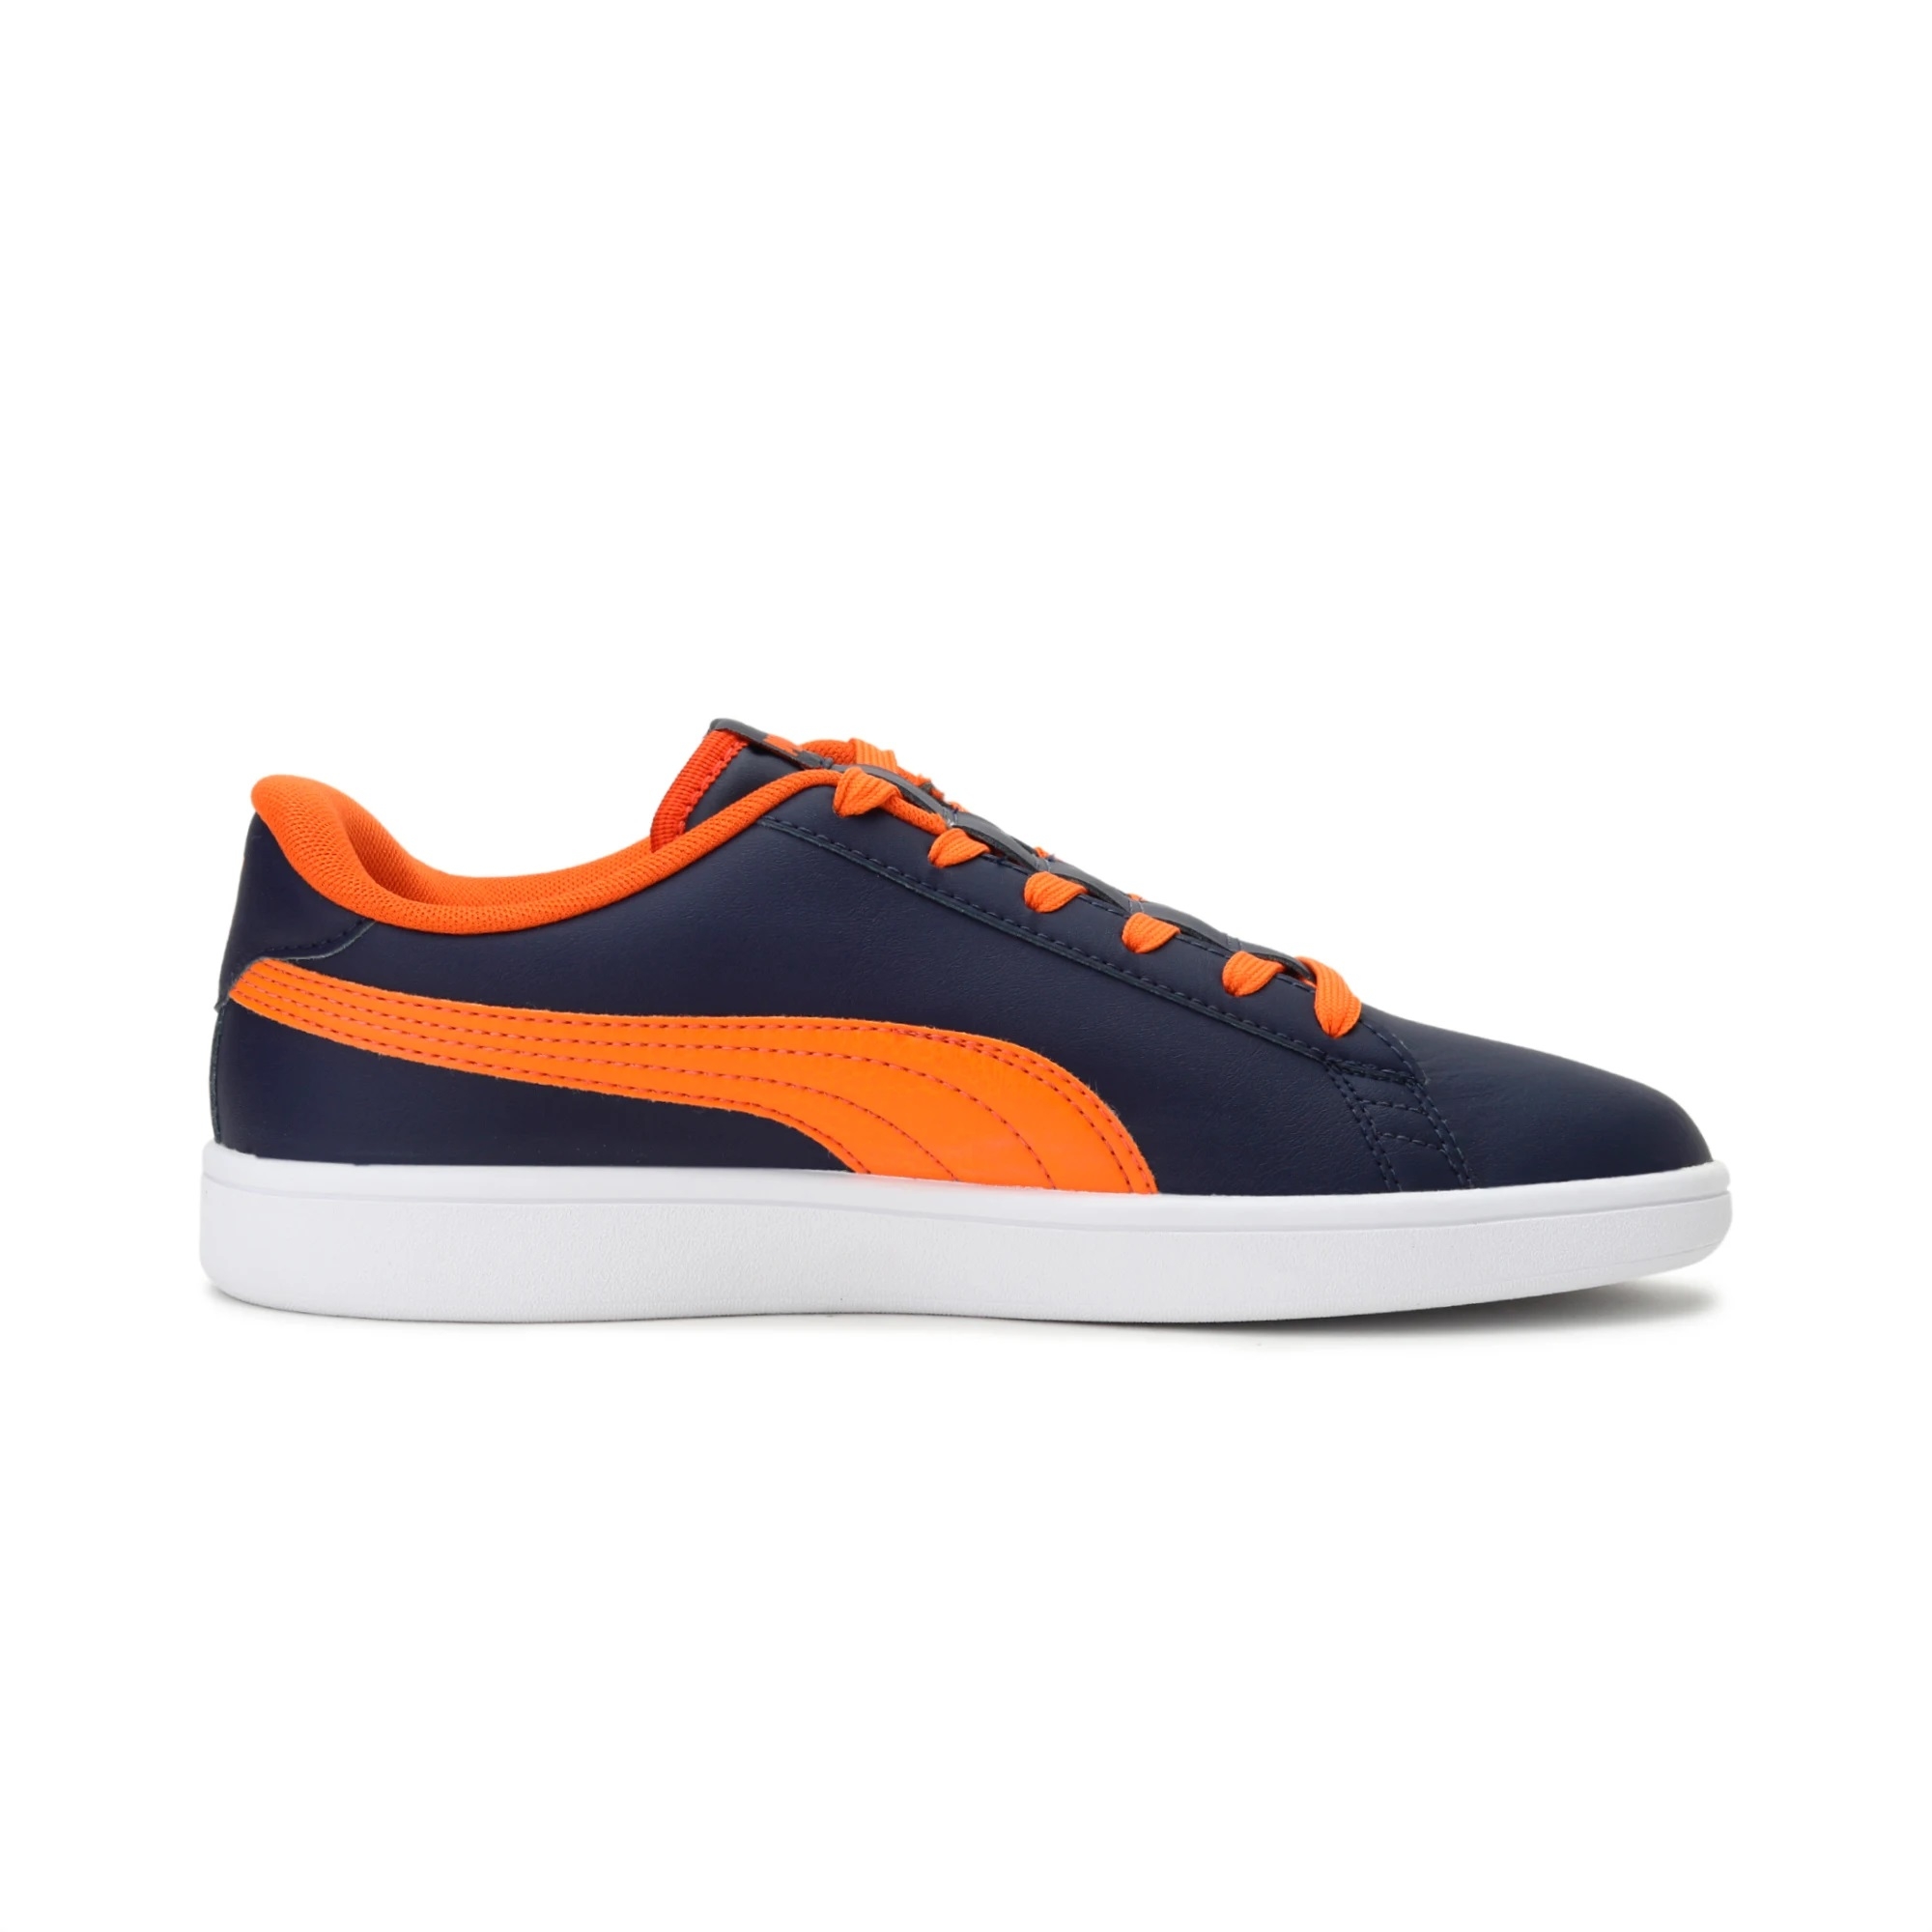 PUMA Icon Canvas Shoes For Men - Buy PUMA Icon Canvas Shoes For Men Online  at Best Price - Shop Online for Footwears in India | Flipkart.com